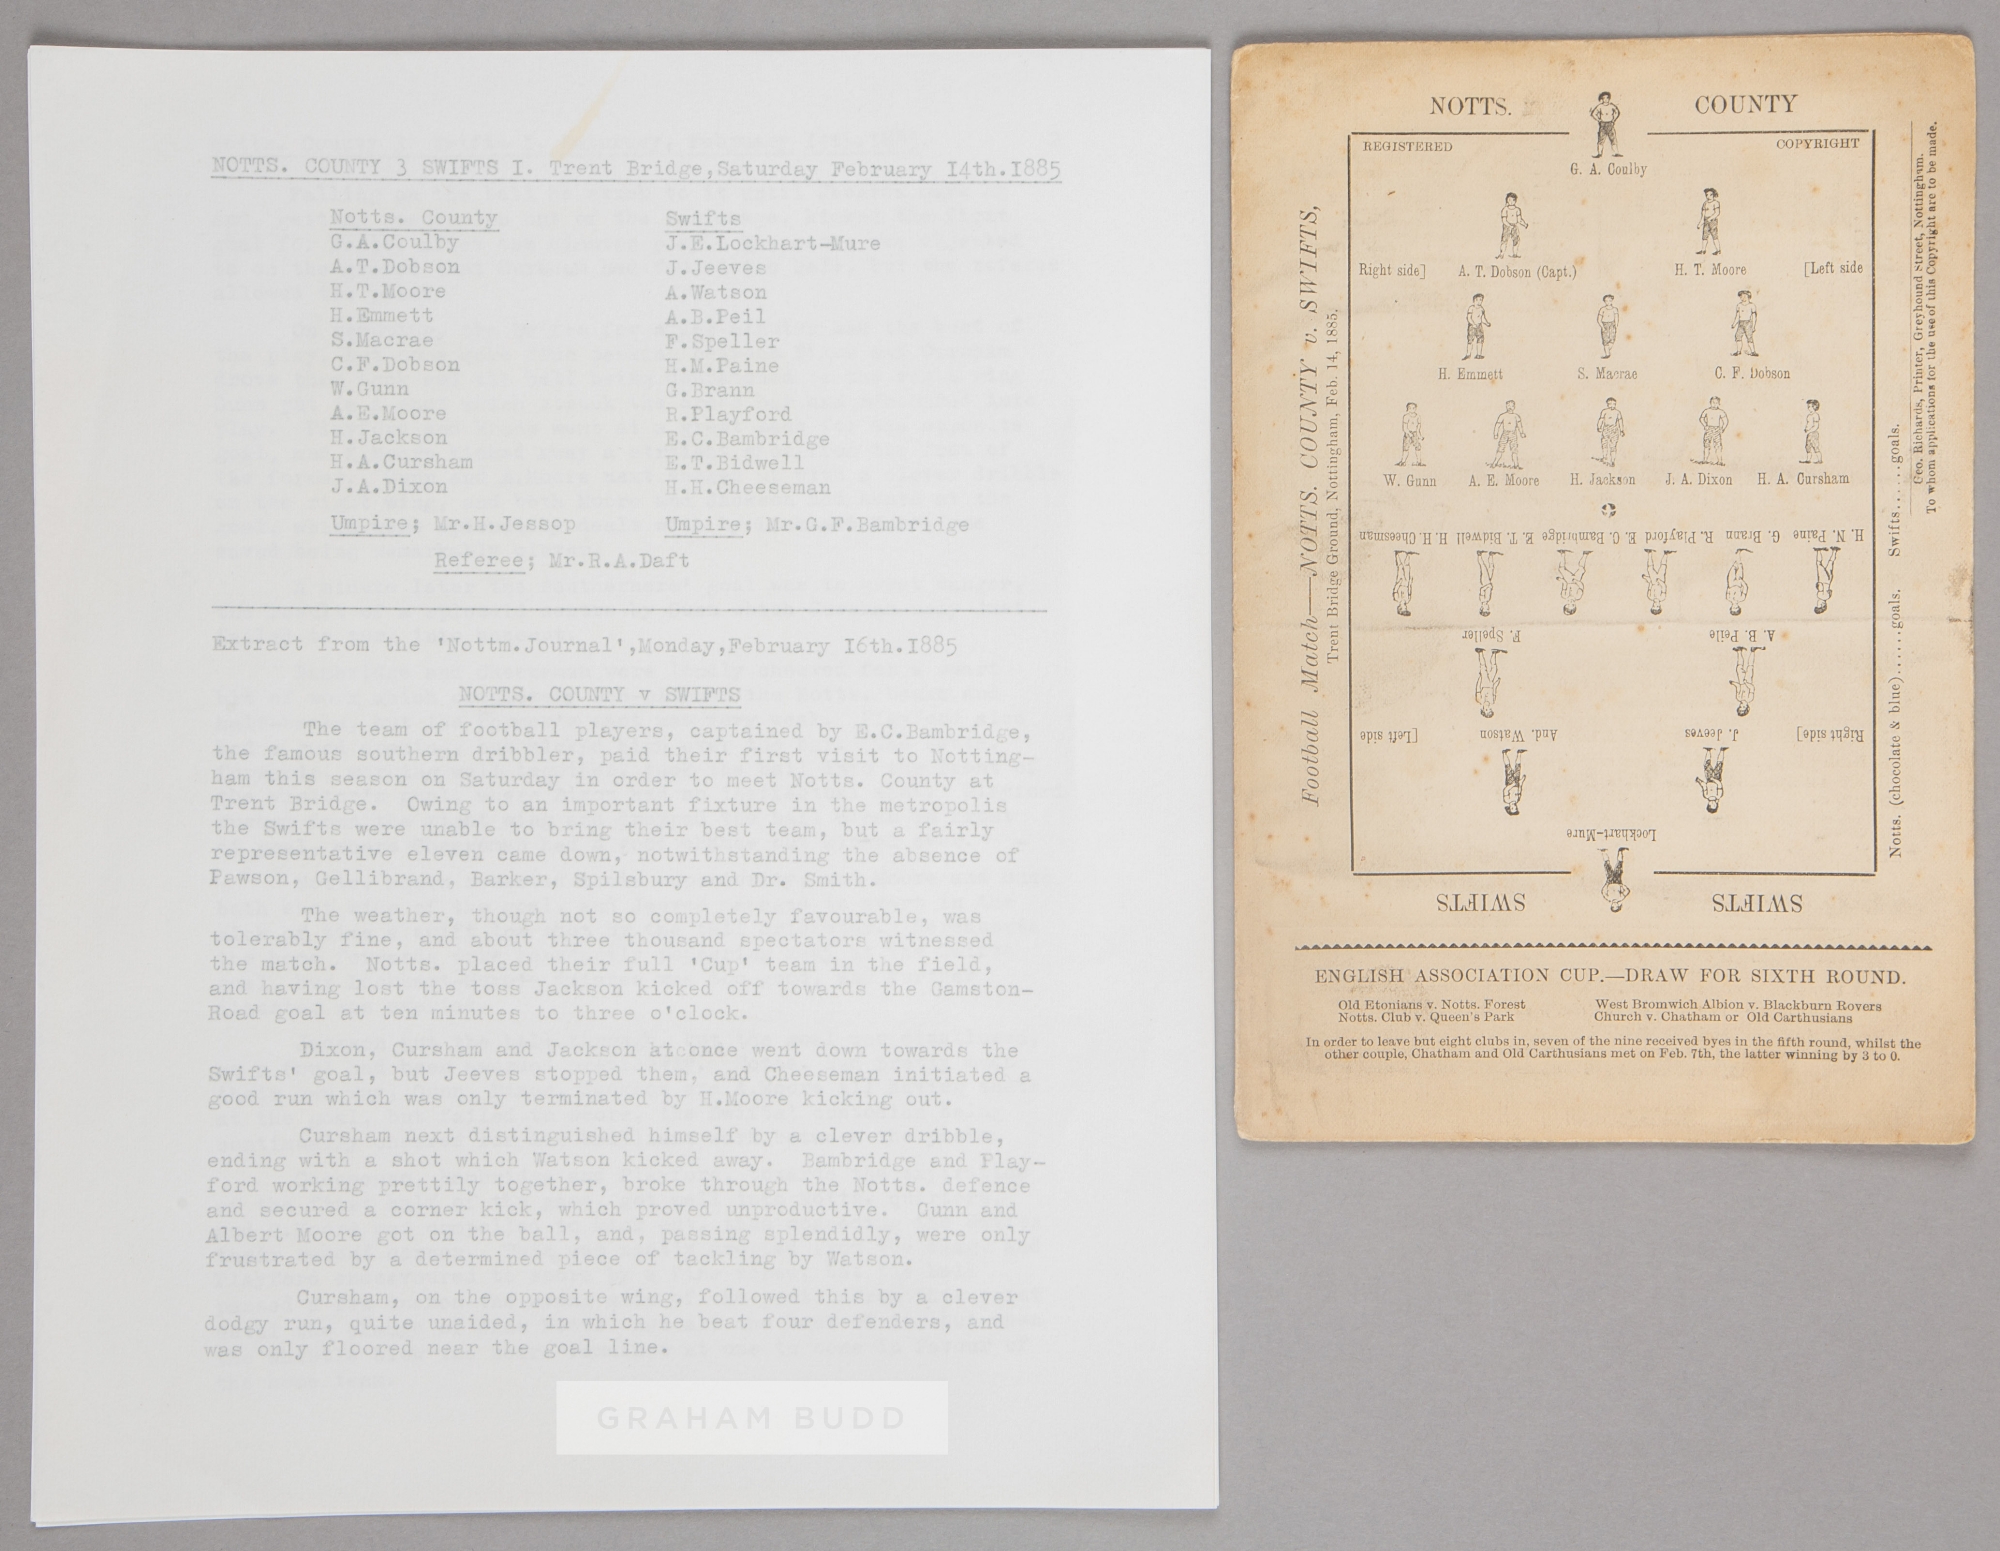 Notts County v Swifts FC (Slough) programme 14th February 1885, sold with a typescript copy of the - Image 2 of 2